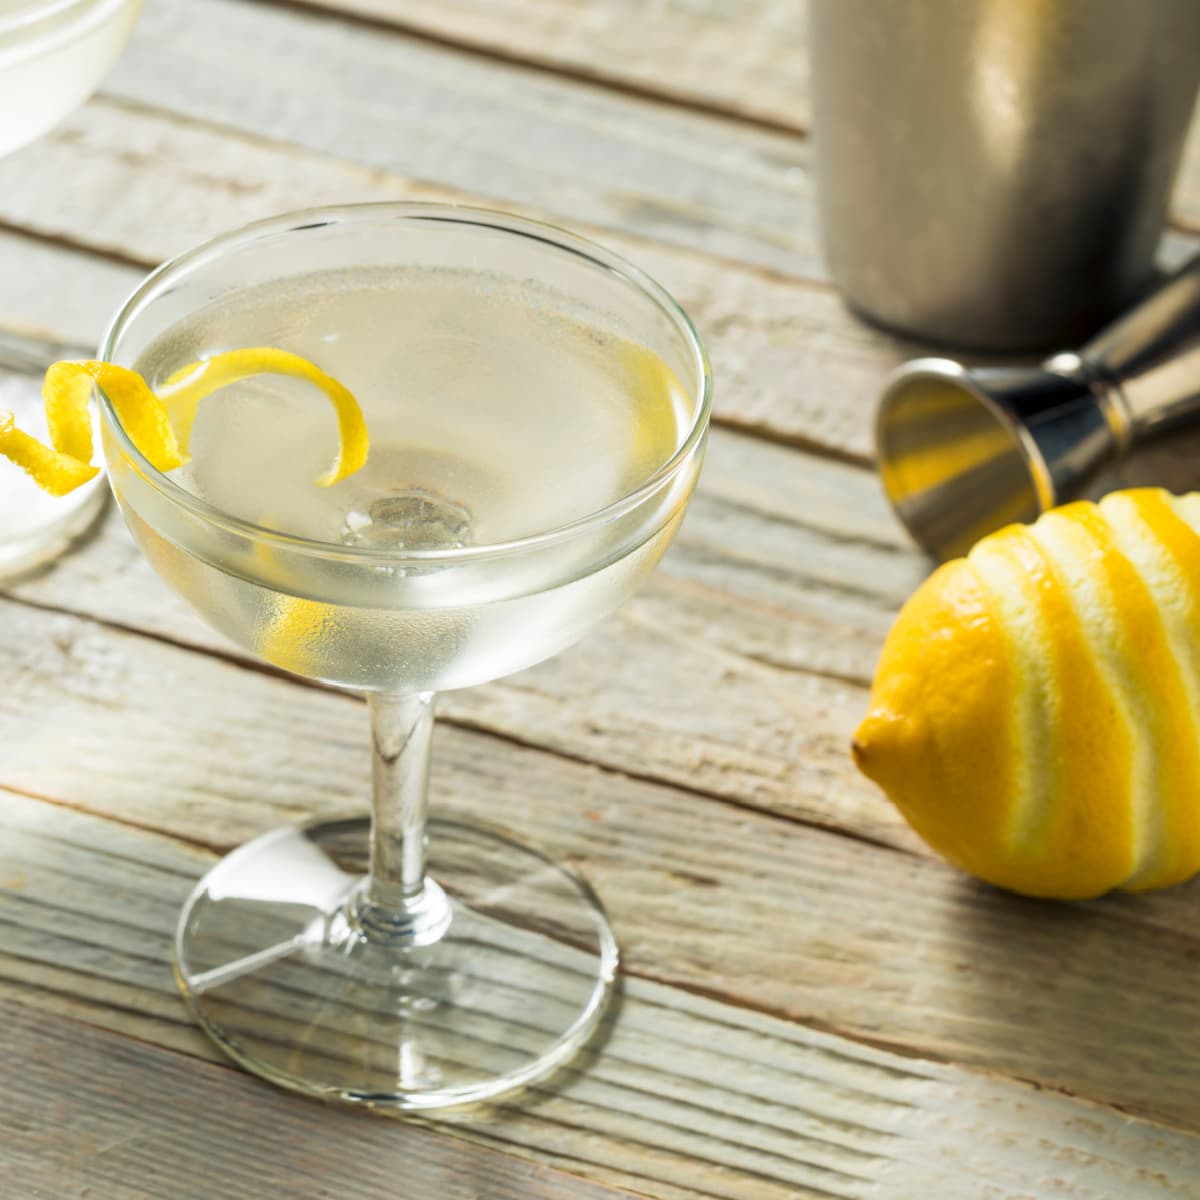 A glass of Vesper Martini garnished with peeled lemon, with jigger and shaker on a wooden table